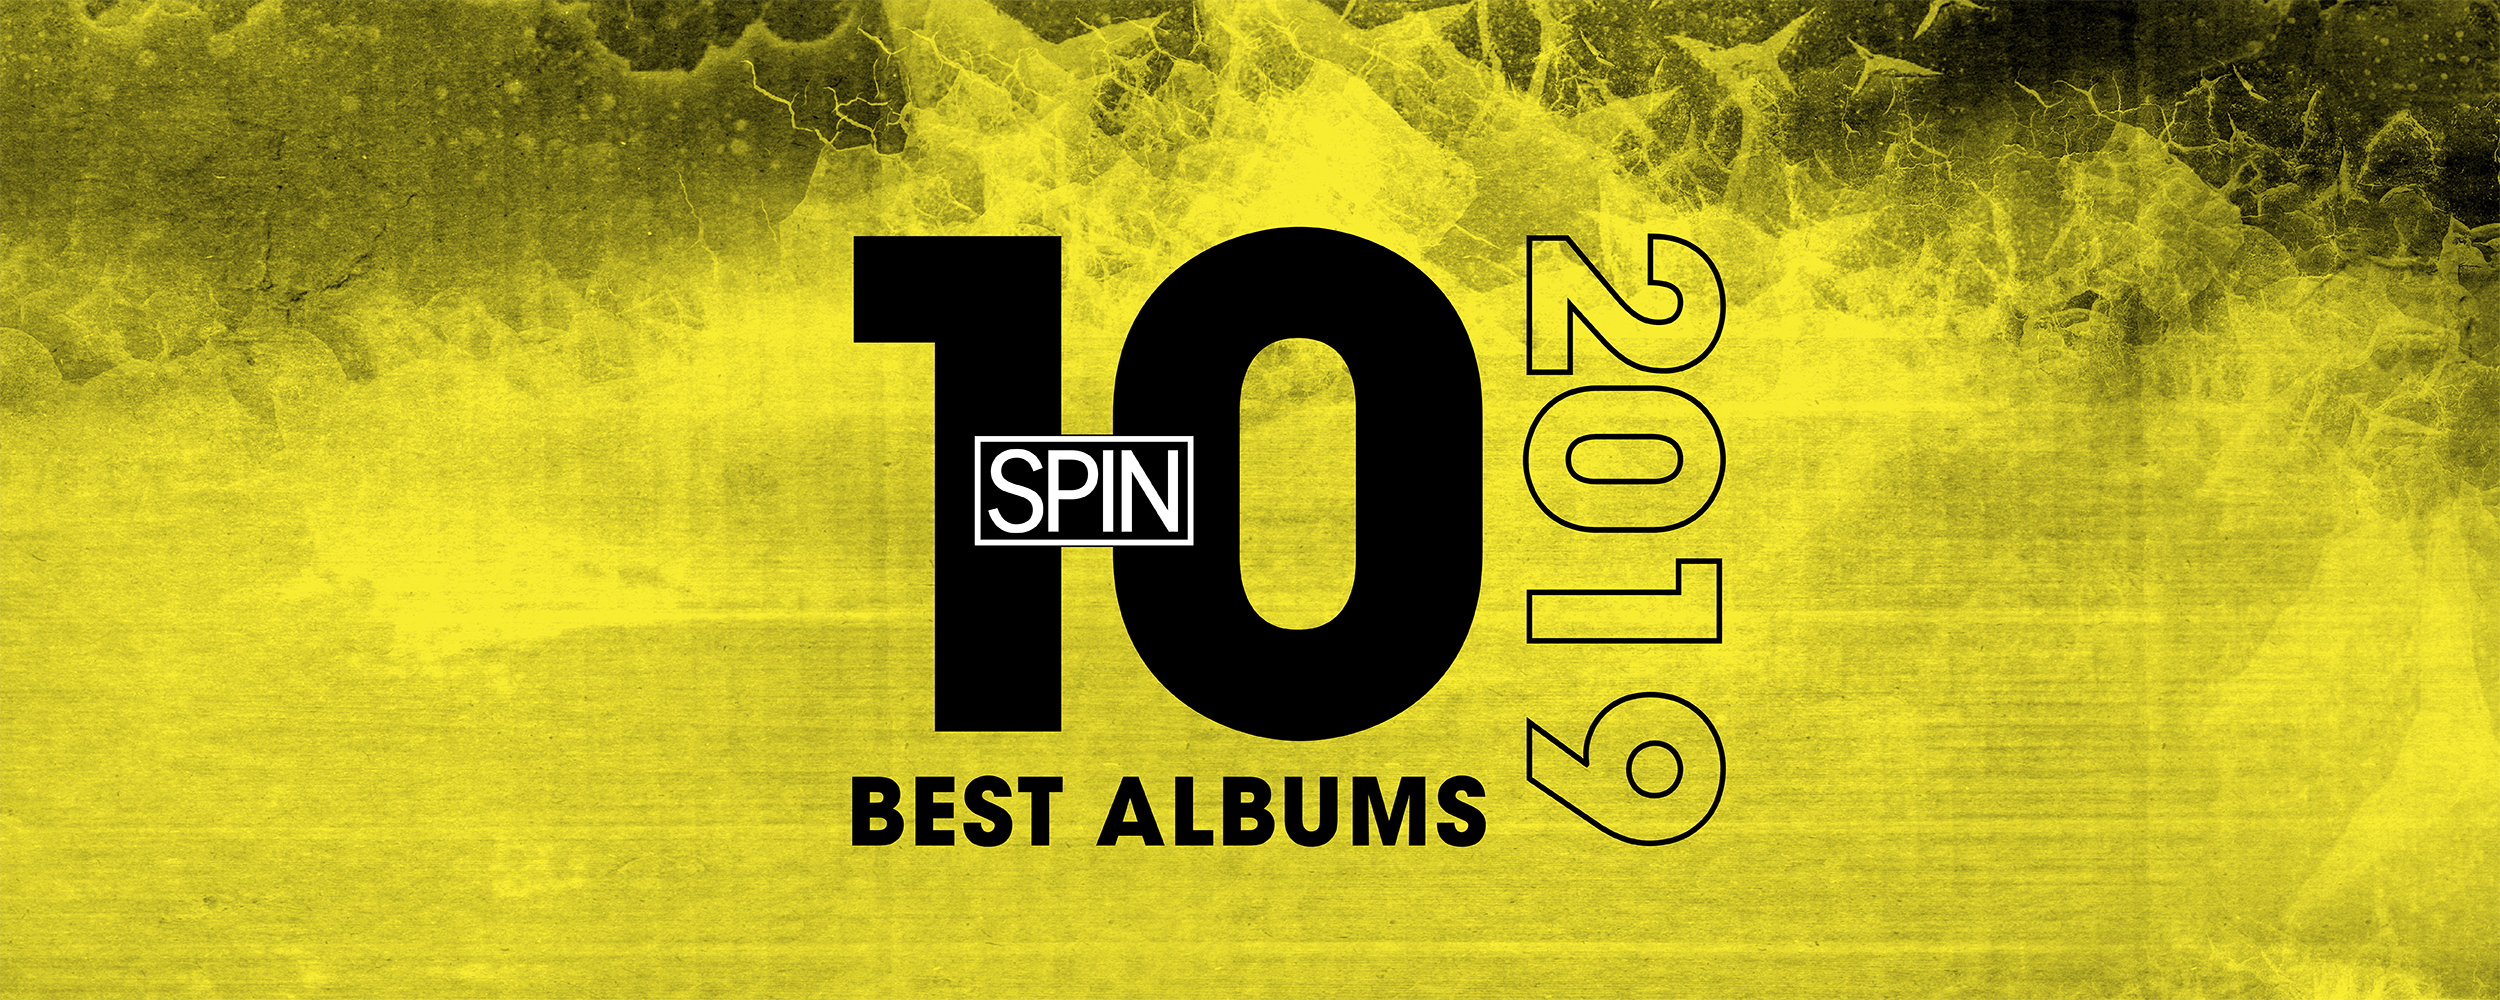 SPIN's 10 best albums of 2019